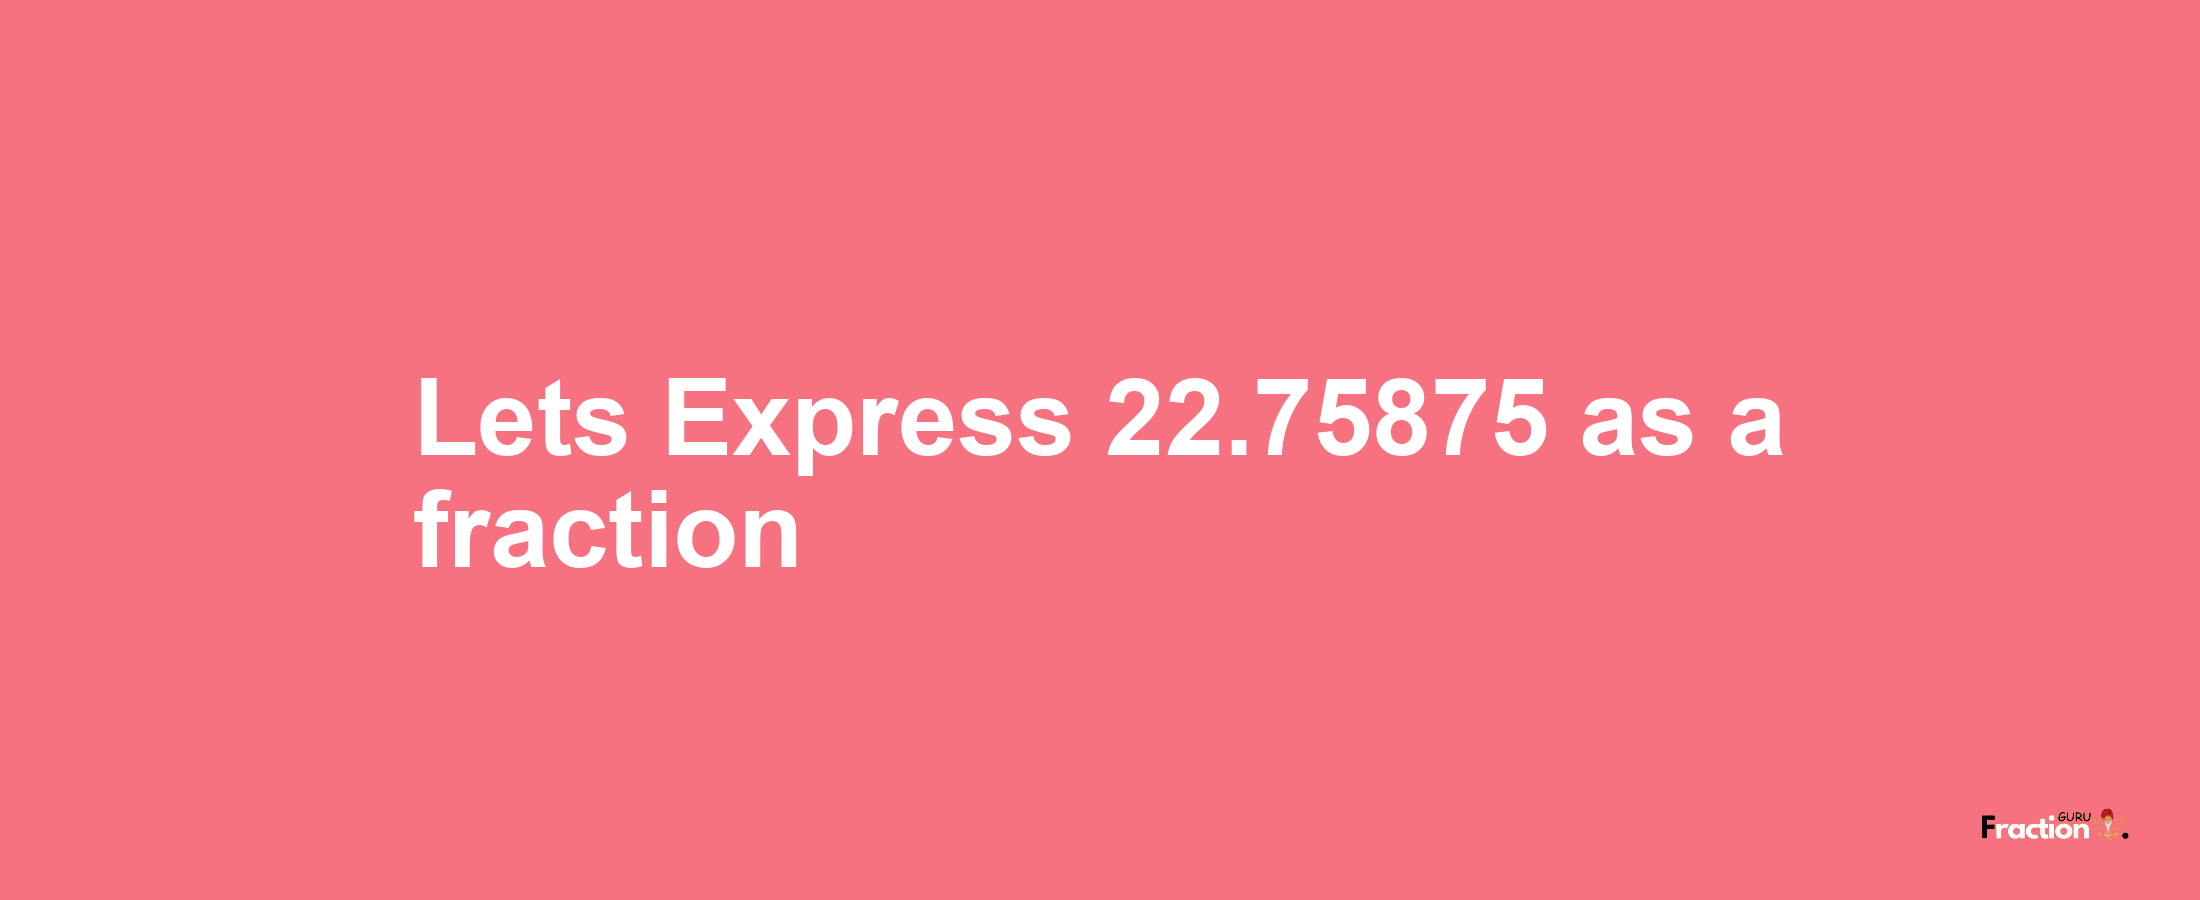 Lets Express 22.75875 as afraction